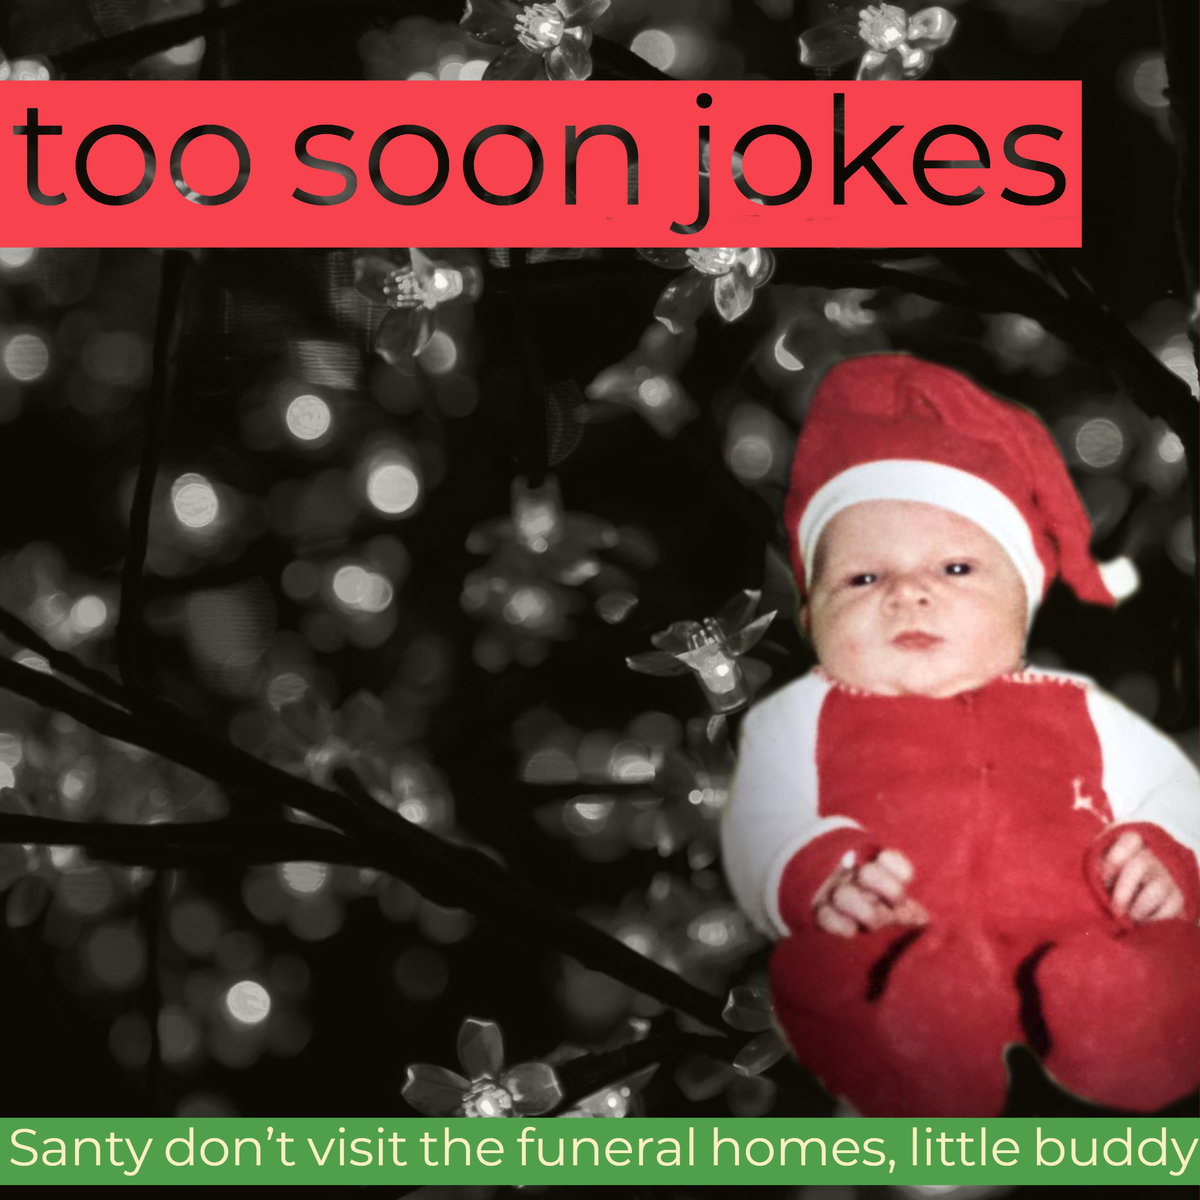 Too Soon Jokes – “Santy Don’t Visit the Funeral Homes, Little Buddy”